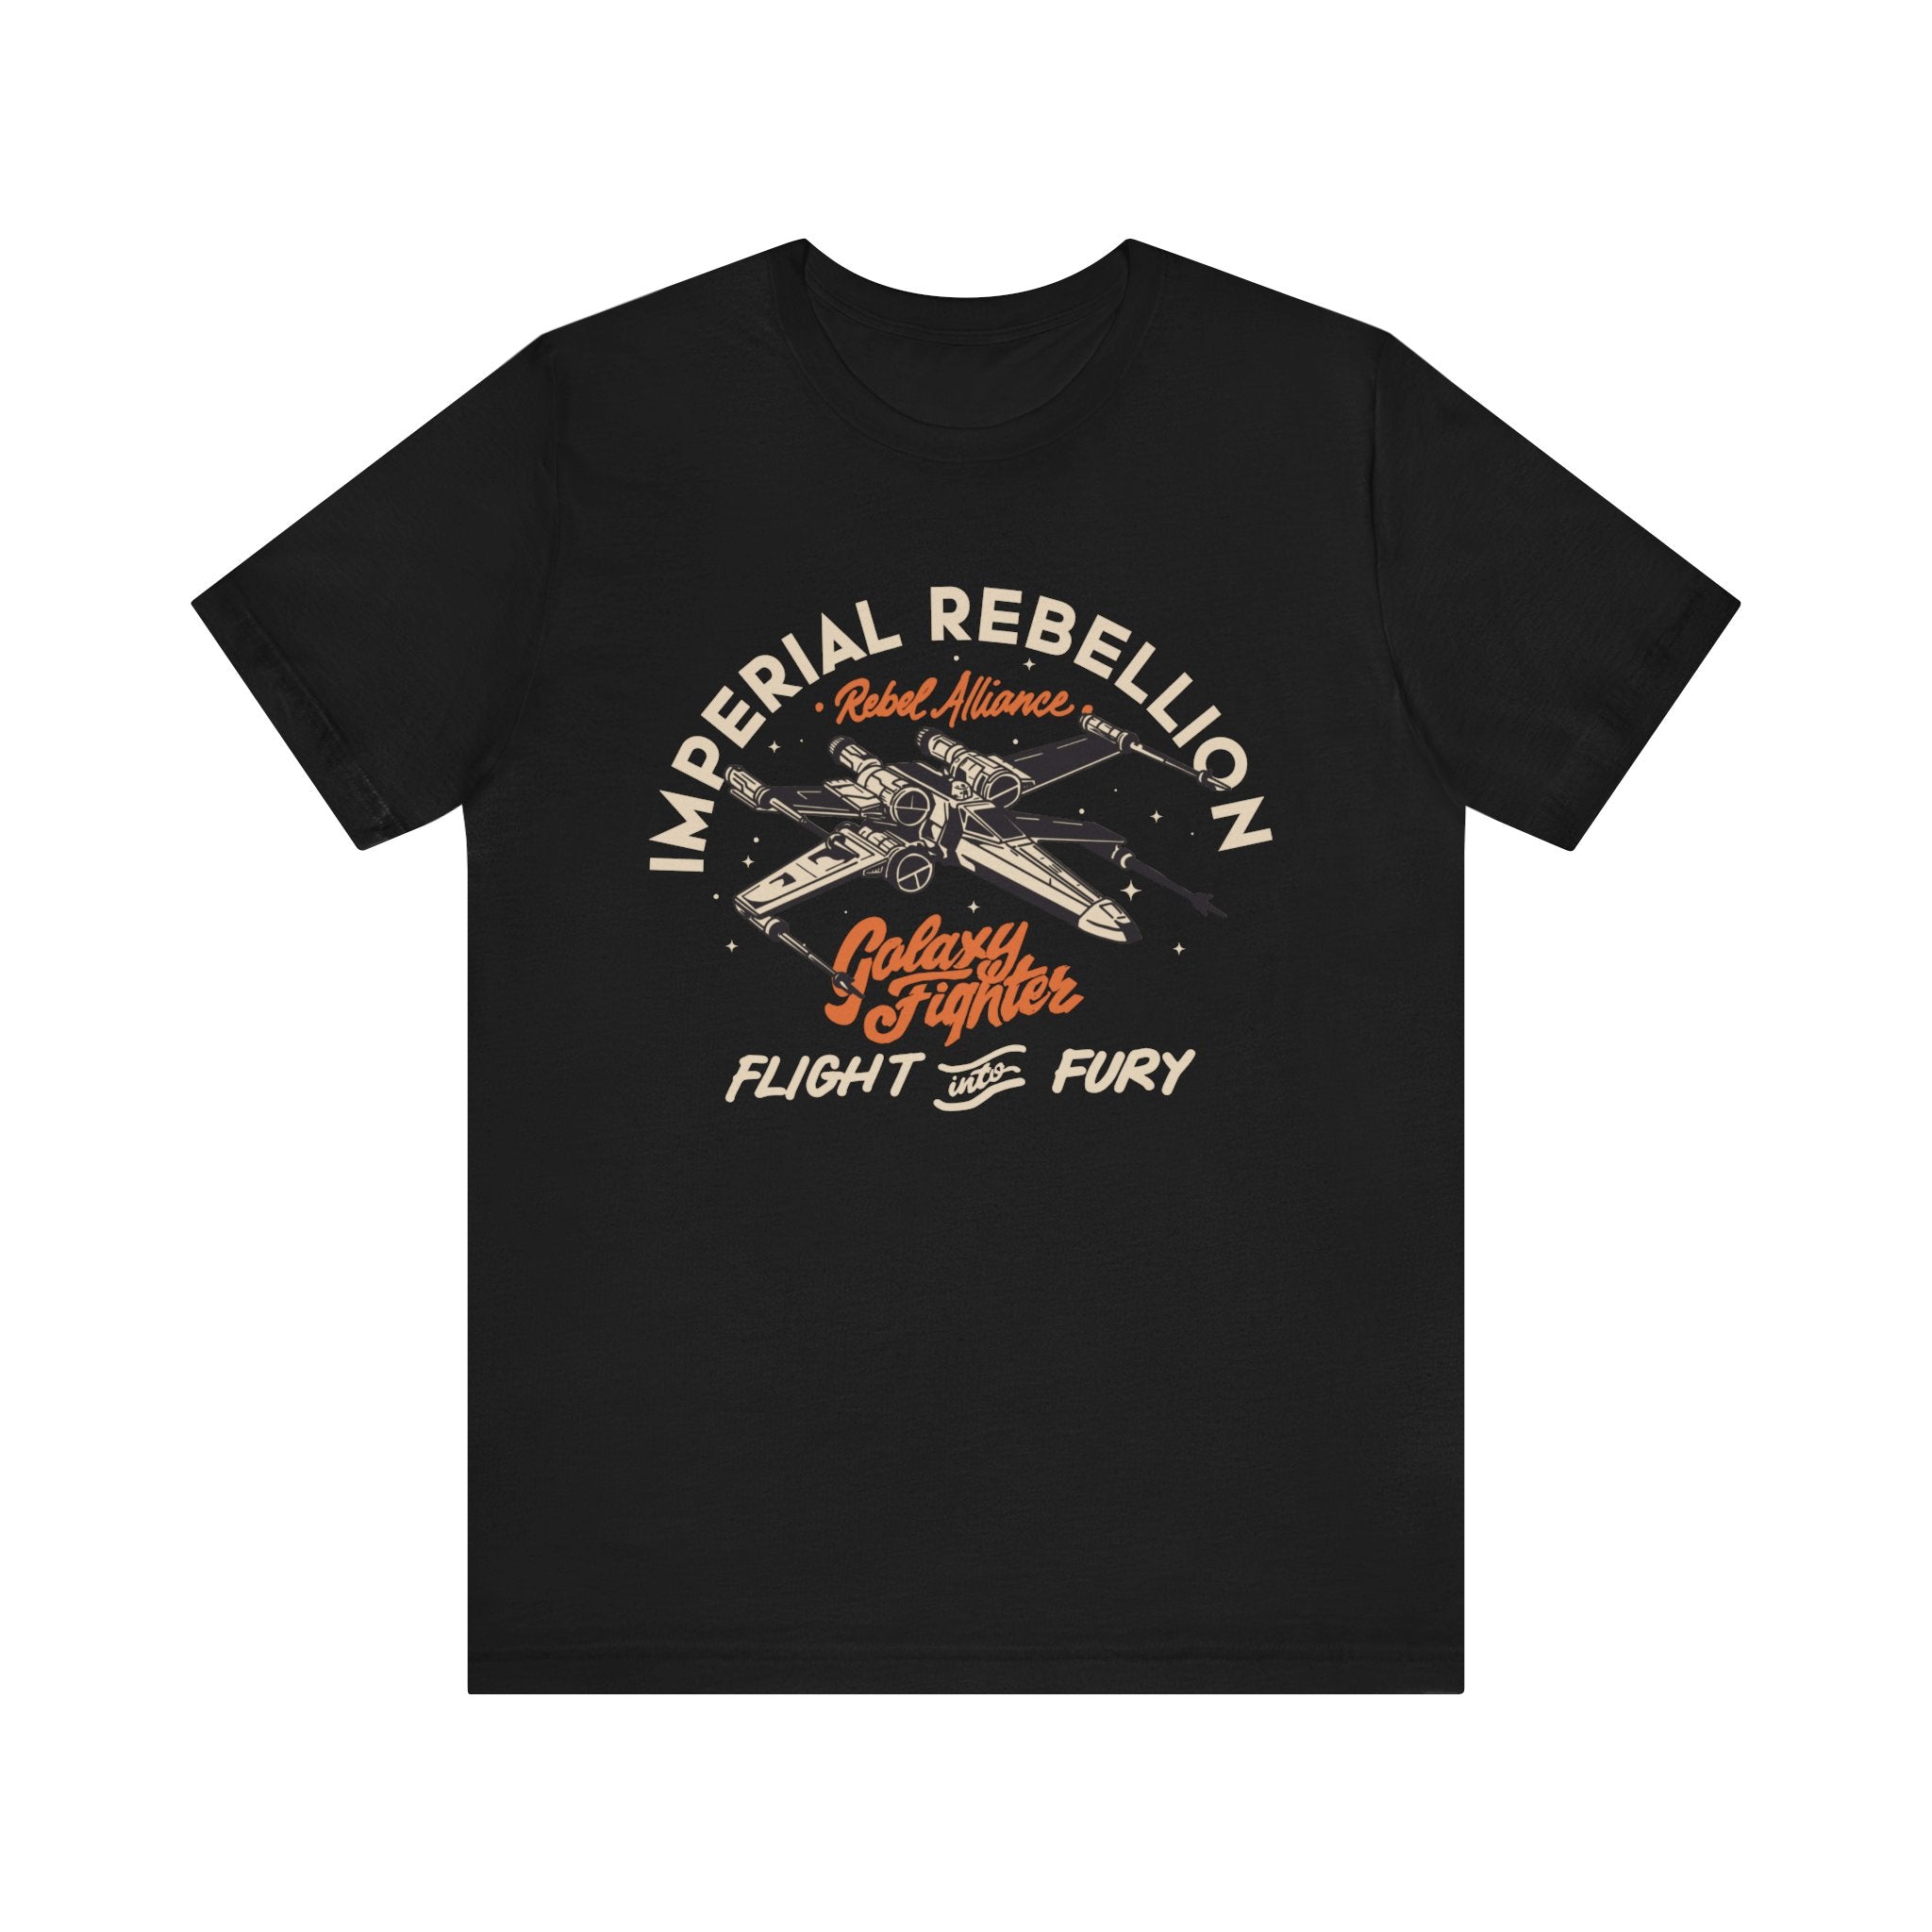 Imperial Rebel T-Shirt crafted from soft cotton, featuring a graphic design with text "imperial rebellion," "rebel alliance," and "galaxy fighter flight fury," with crossed lightsabers.